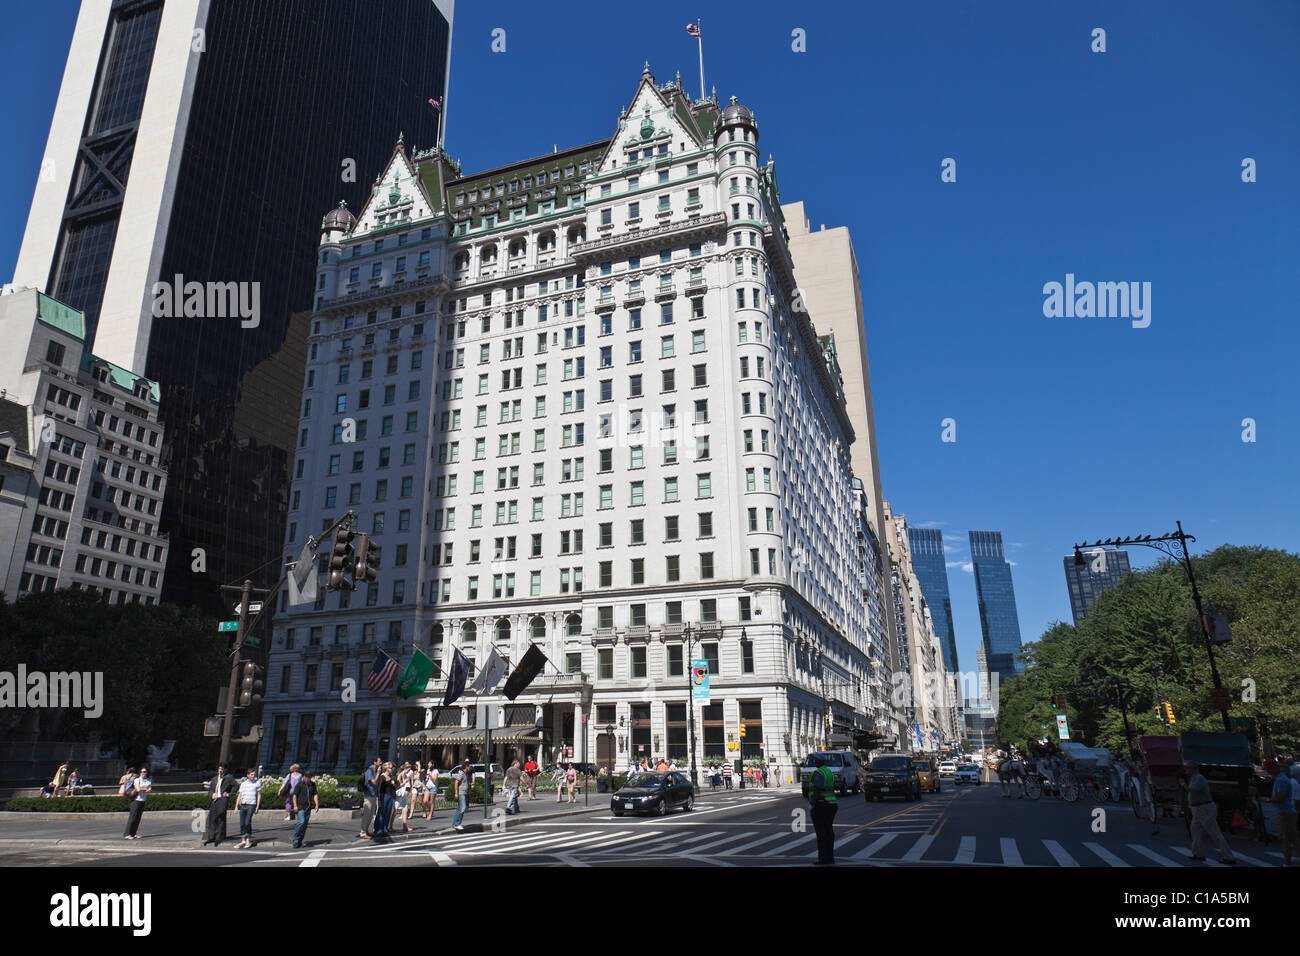 The Plaza Hotel on Central Park in Manhattan. Stock Photo